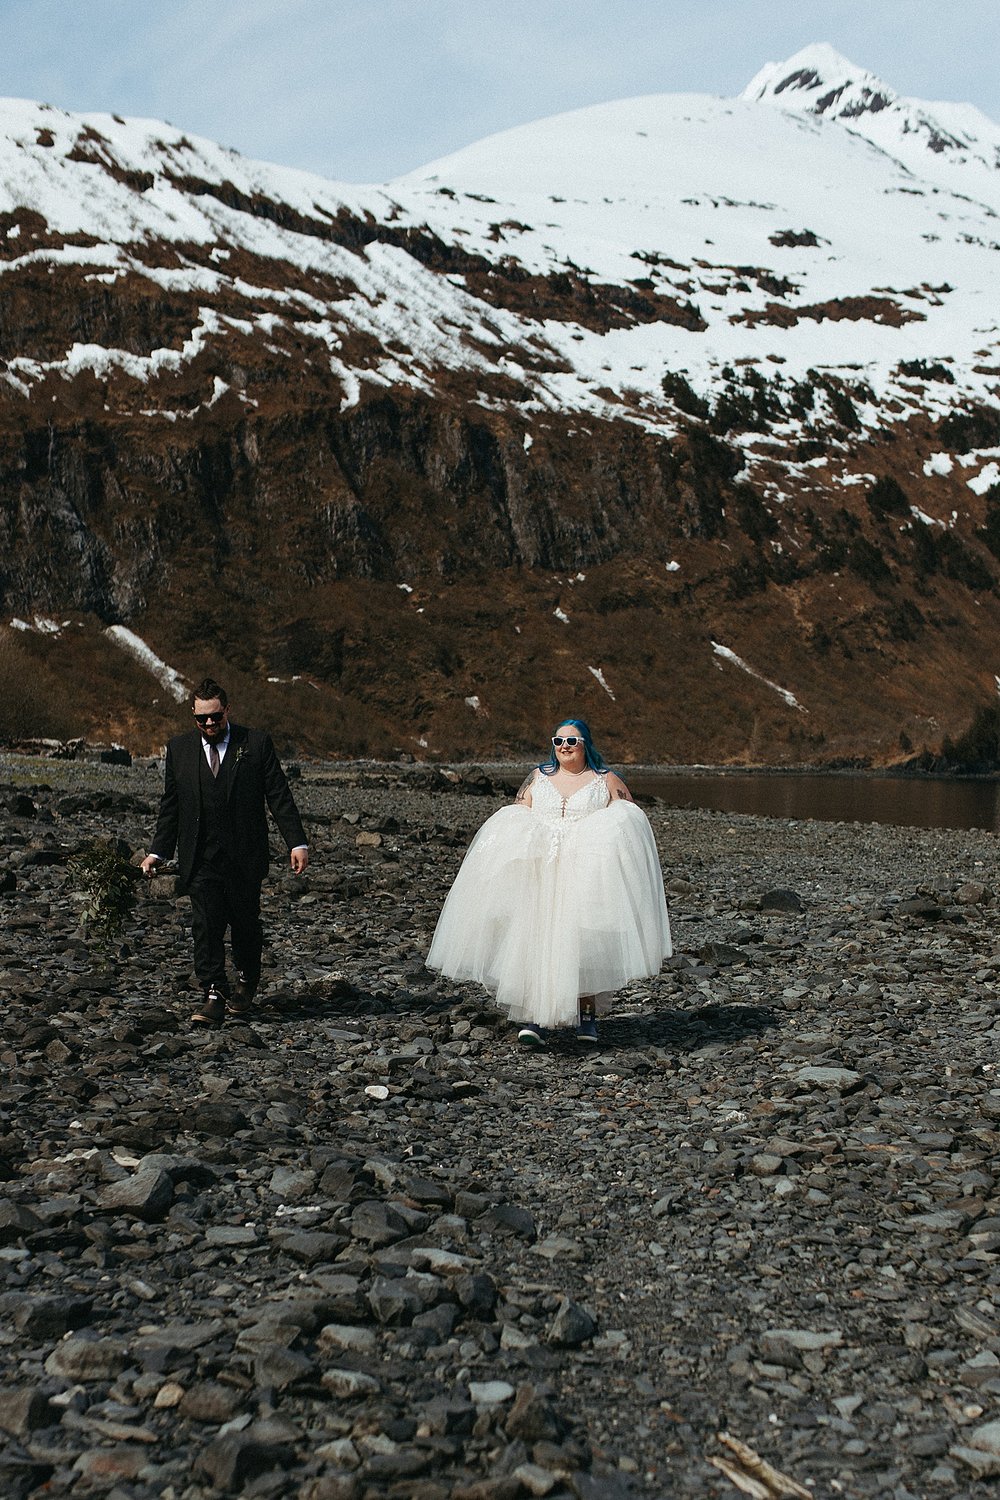  Bride and groom walking on a pebble shore with sunglasses on by Alaska Elopement Photographer 